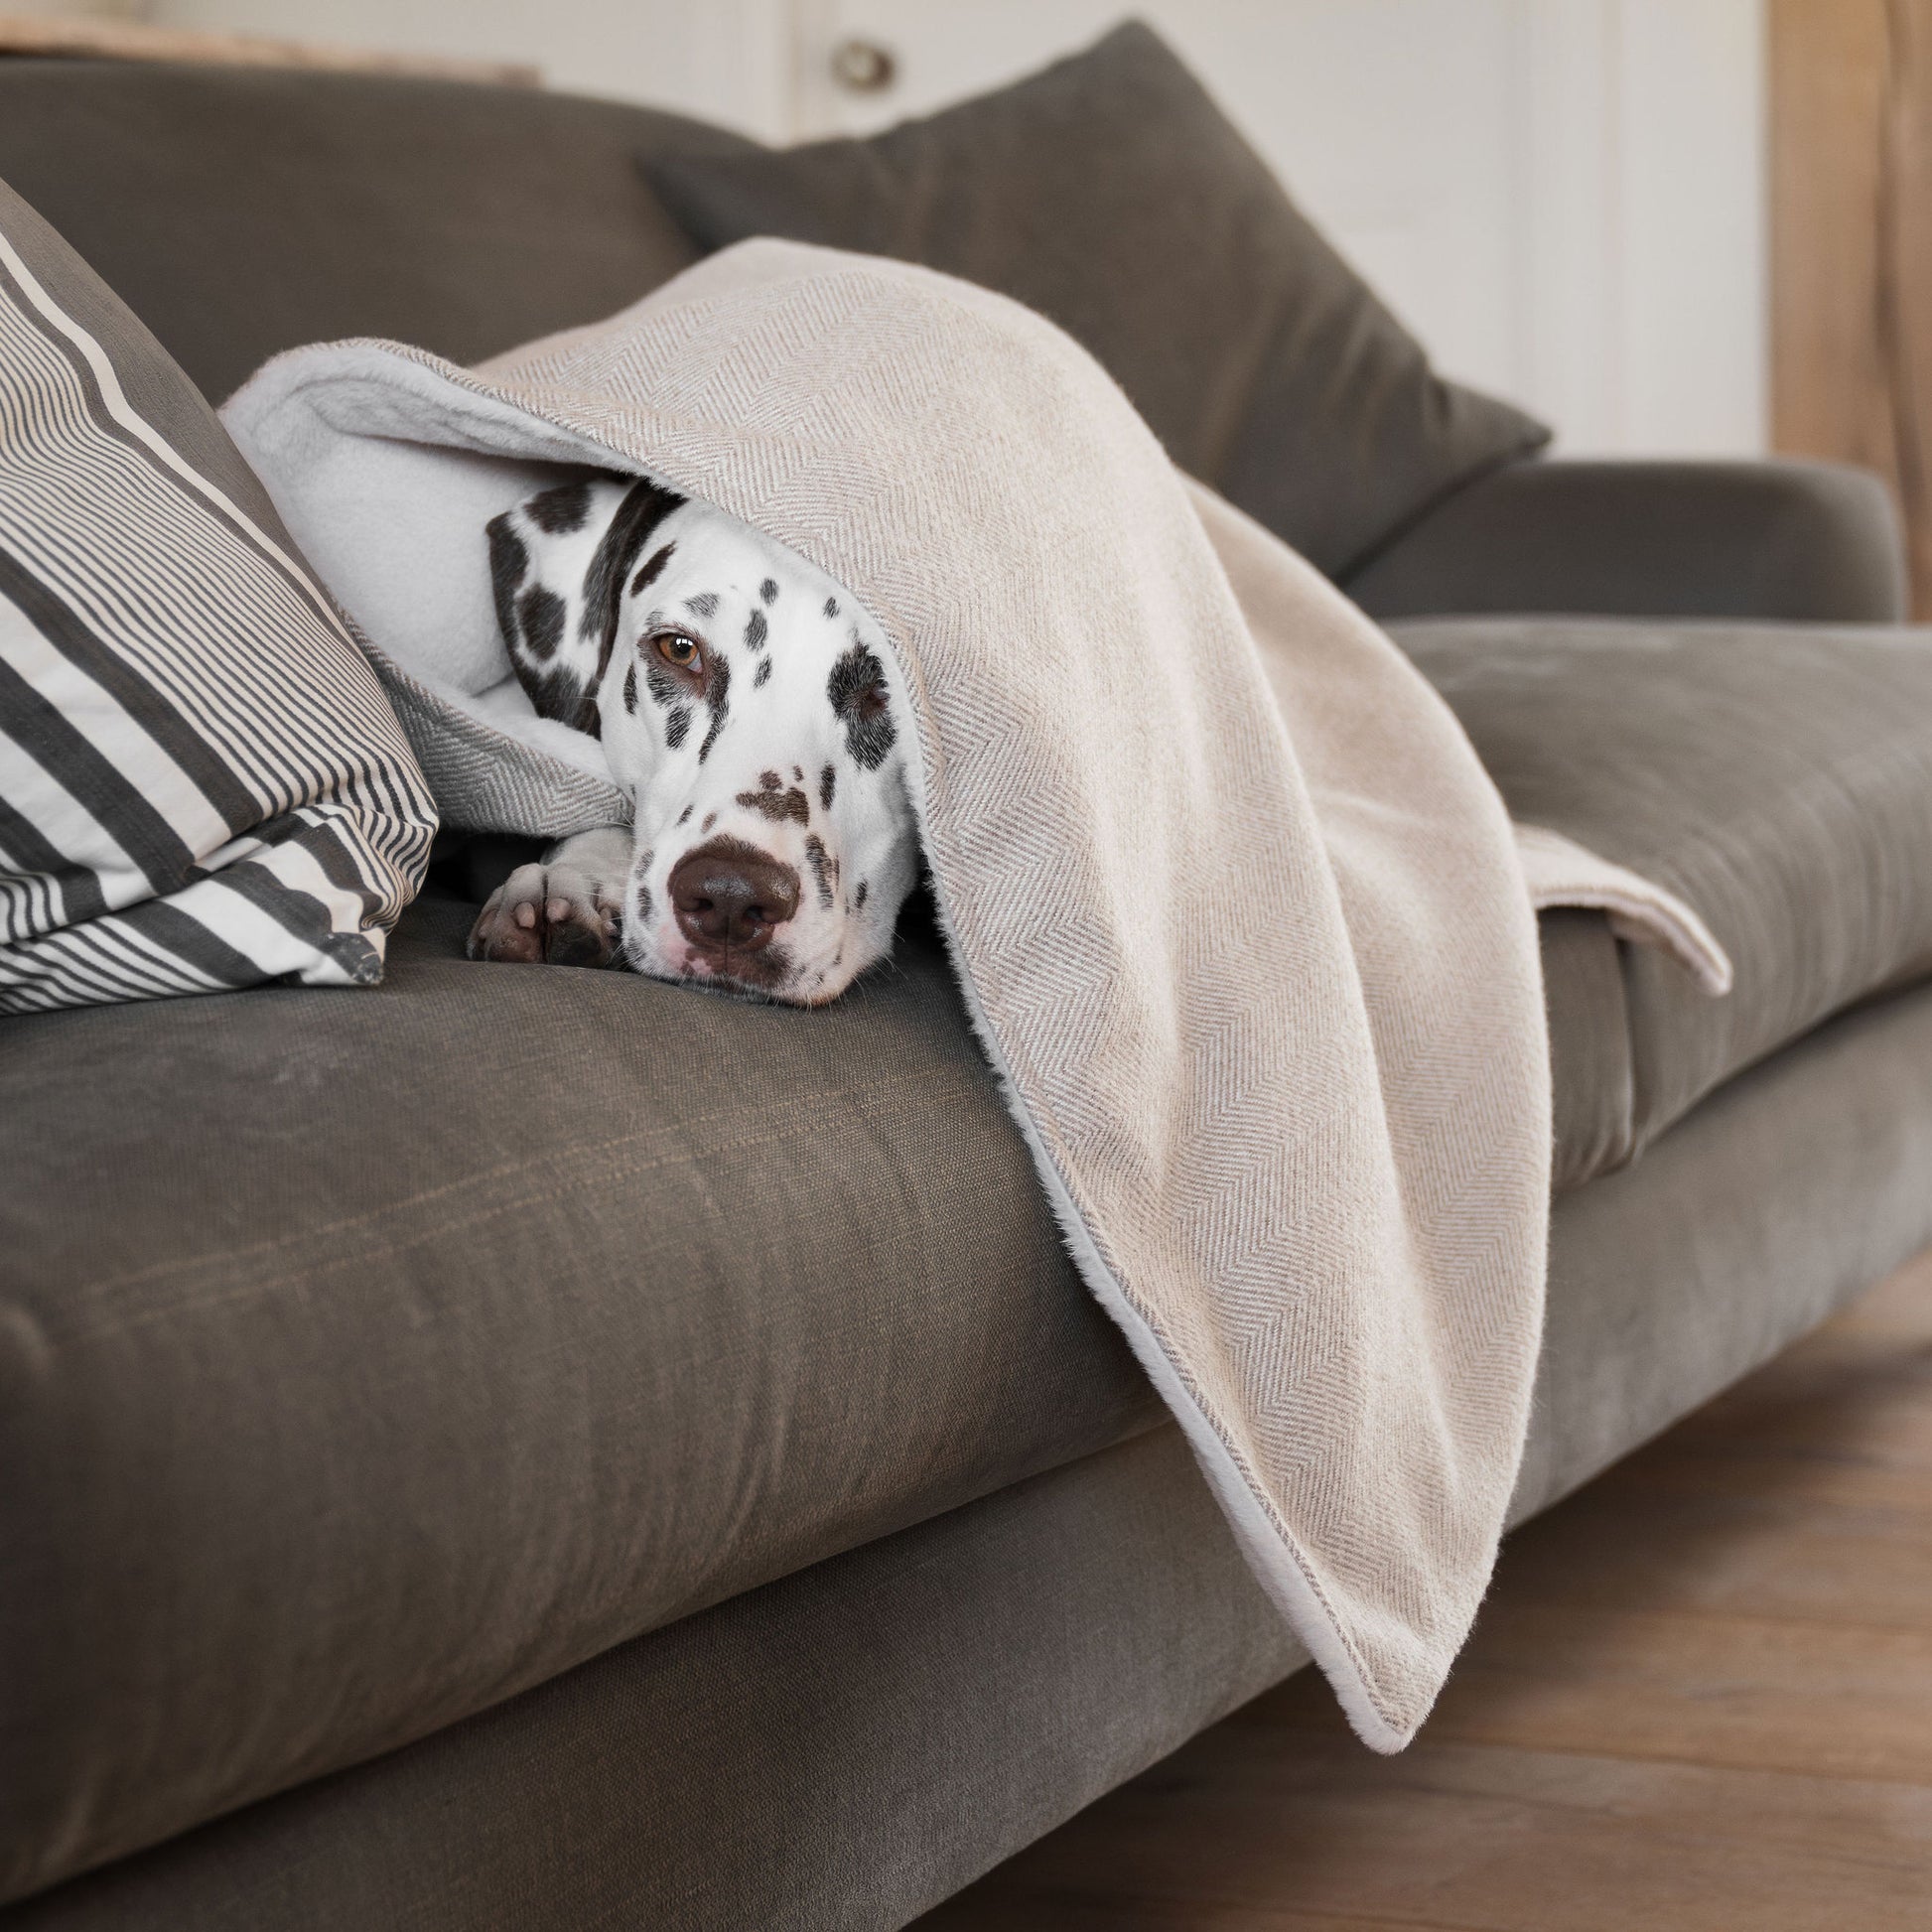 Discover Our Luxurious Natural Herringbone Tweed Dog Blanket With Super Soft Sherpa & Teddy Fleece, The Perfect Blanket For Puppies, Available To Personalize And In 2 Sizes Here at Lords & Labradors US